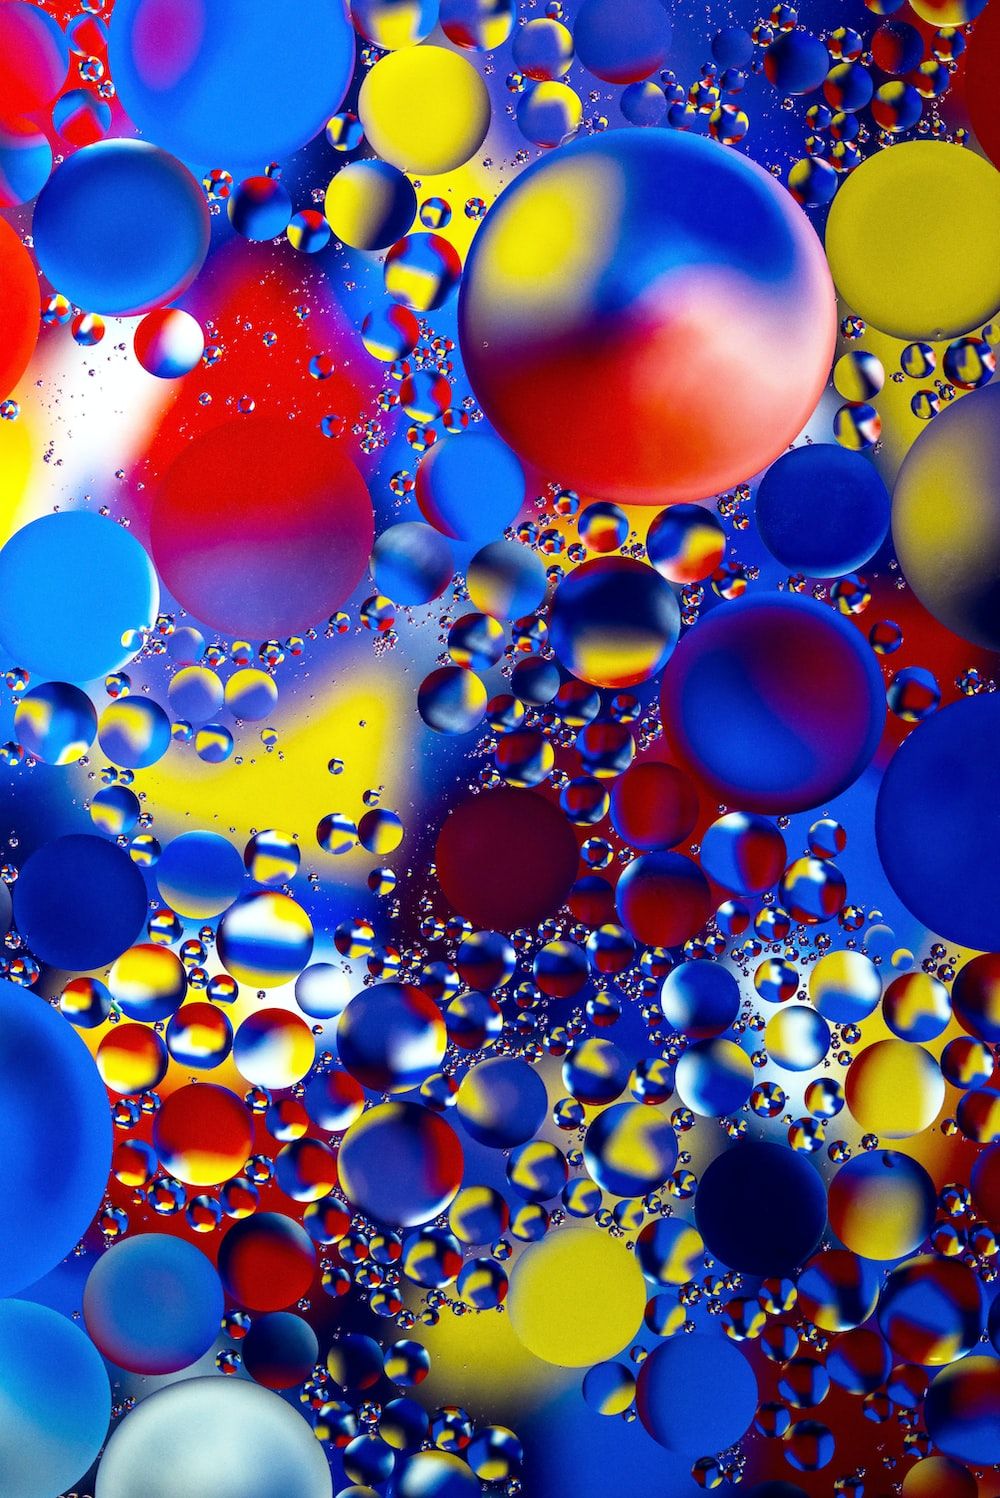 A photo of oil bubbles in water - Bubbles